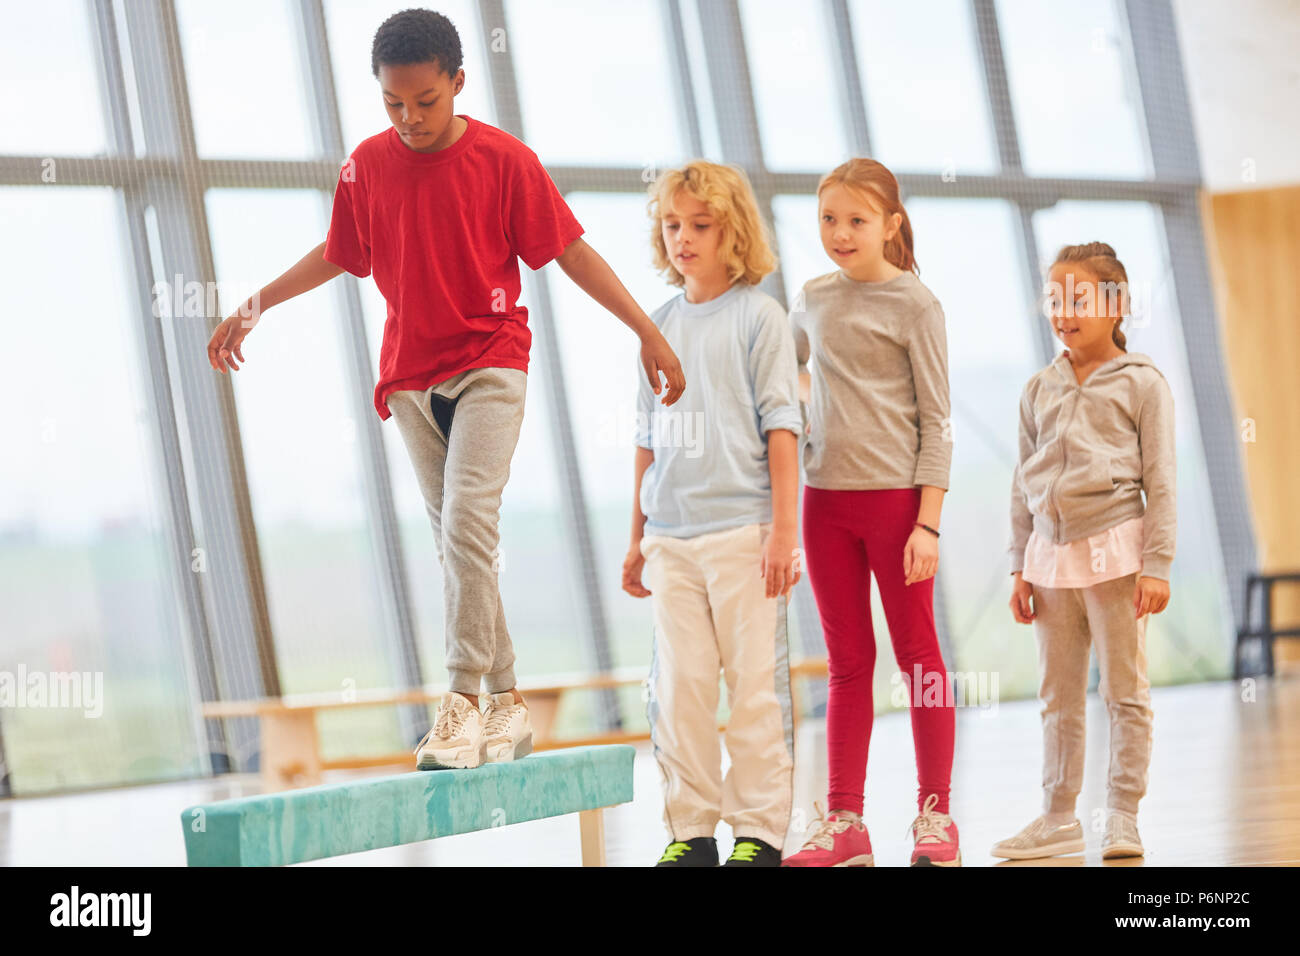 Children do gymnastics at the balance beam in primary school physical education Stock Photo